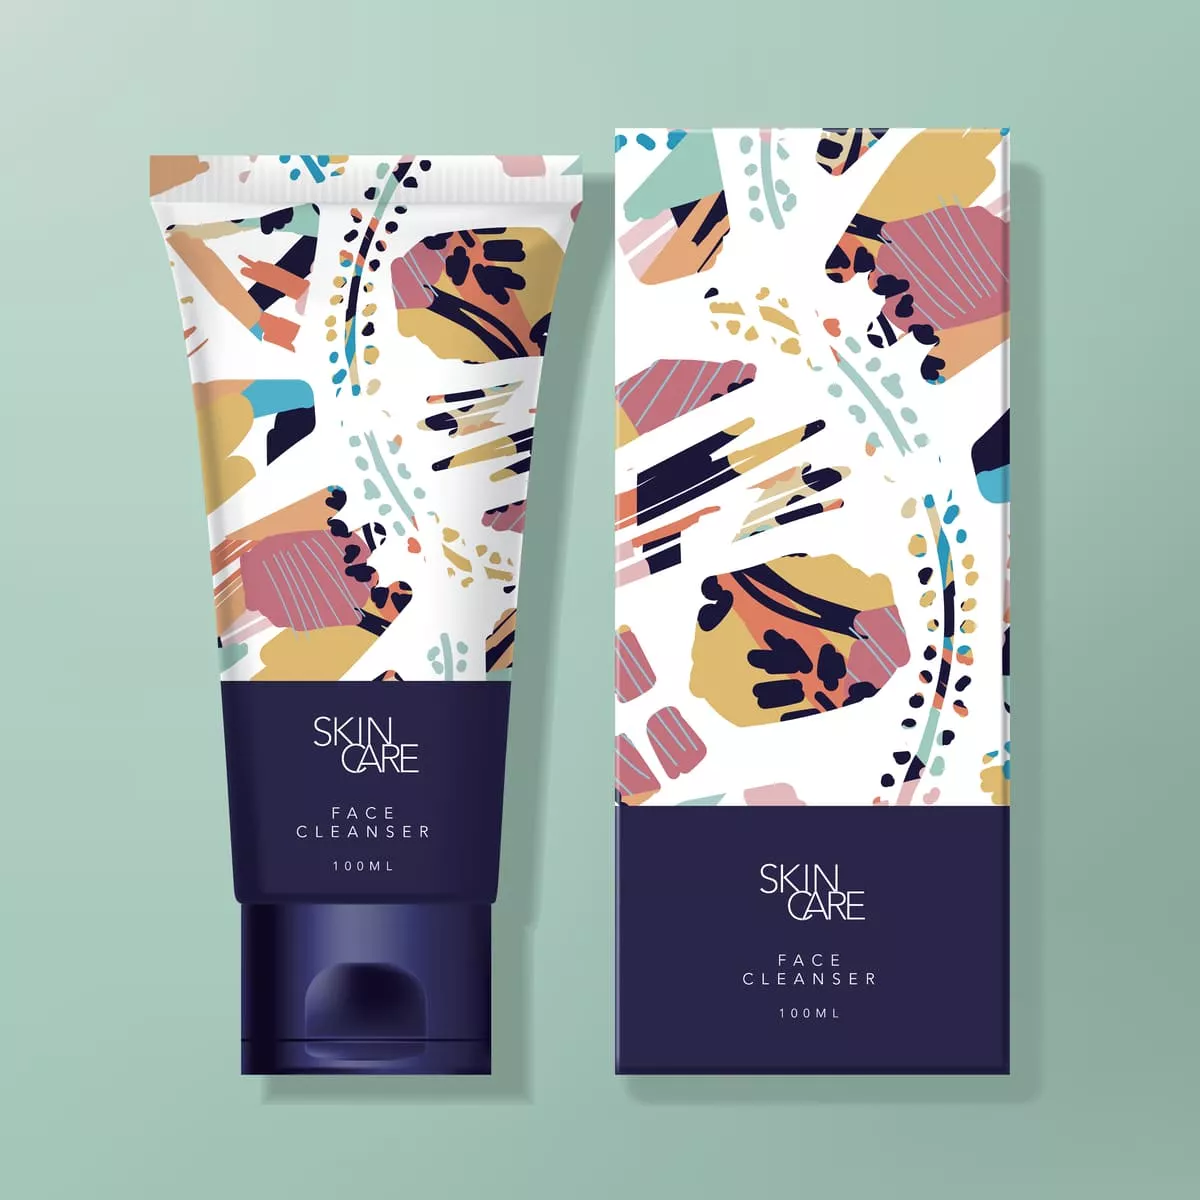 bold pattern design on packaging